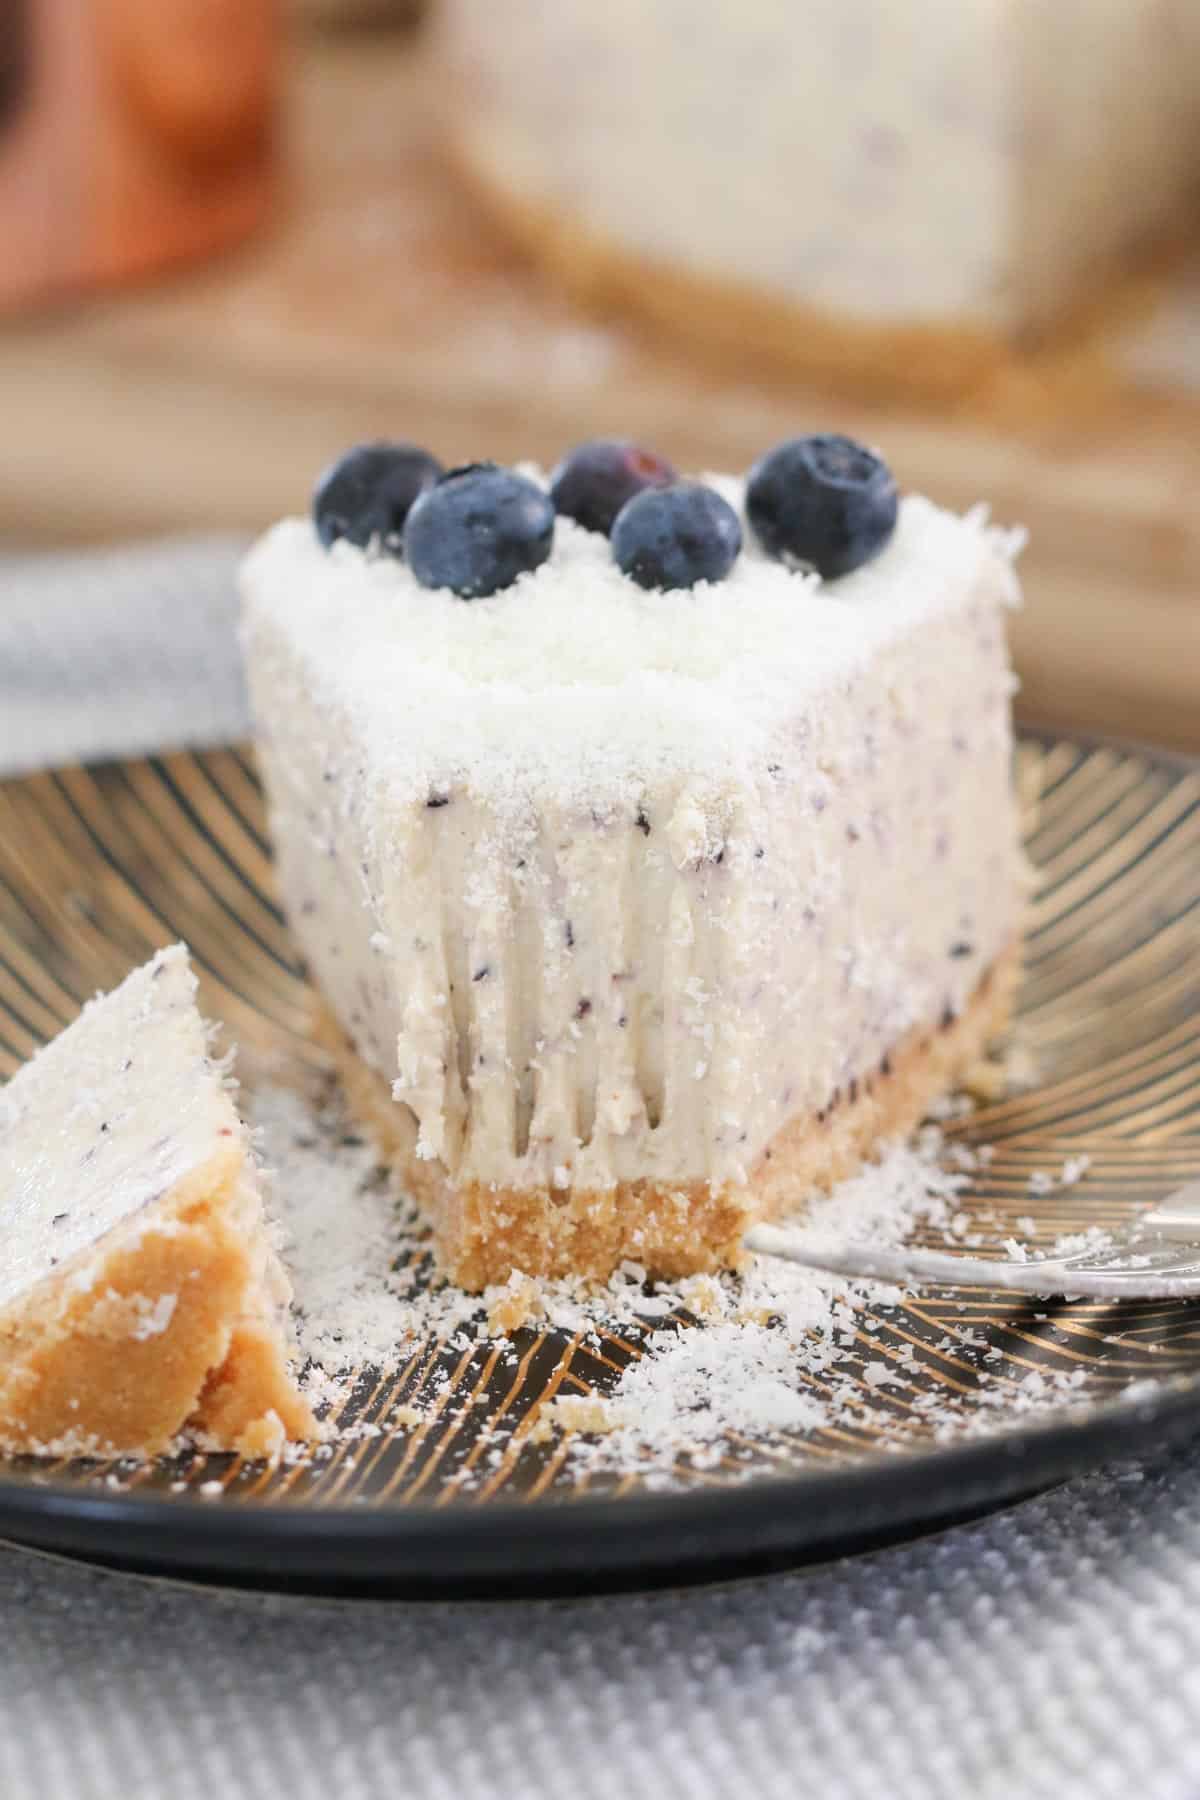 A slice of cheesecake with fresh blueberries on top, with a bite missing